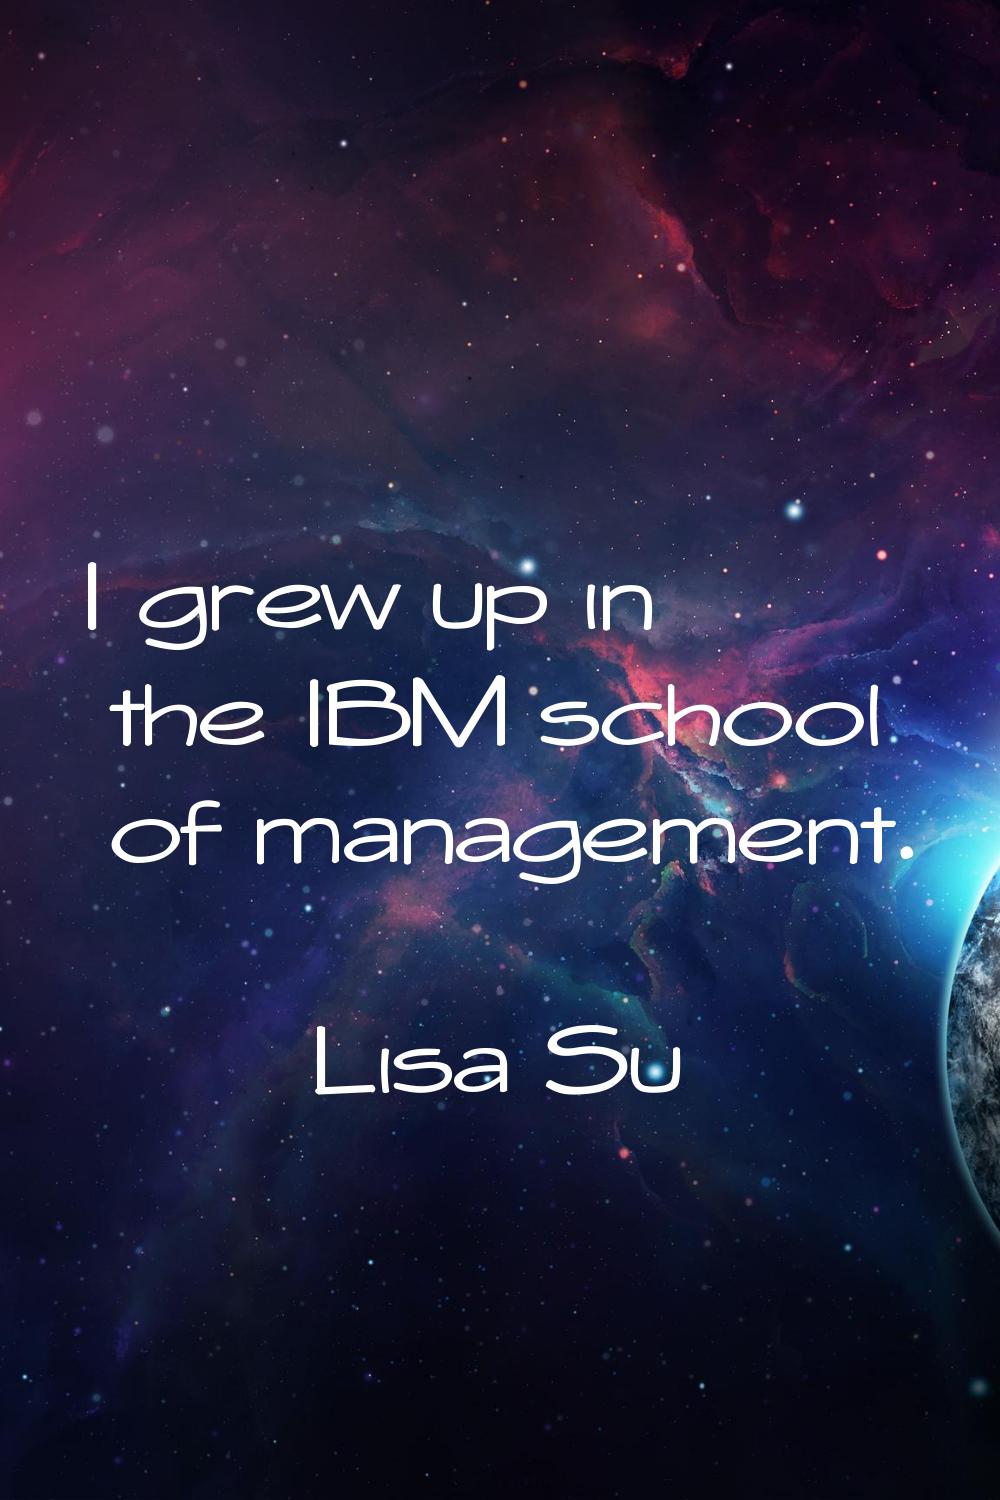 I grew up in the IBM school of management.